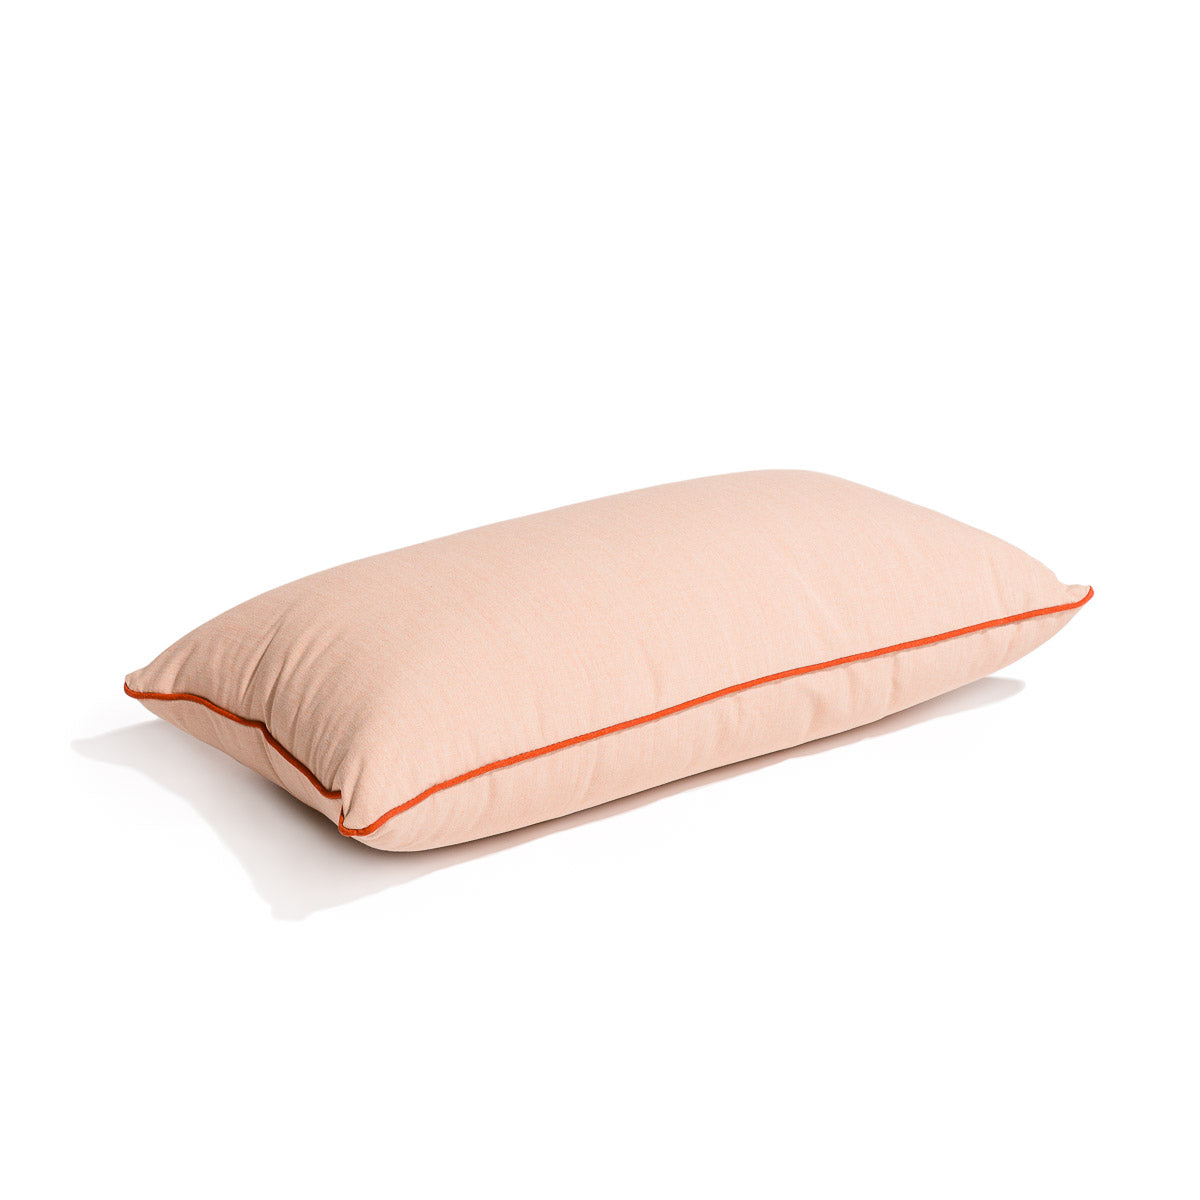 The Rectangle Throw Pillow - Rivie Pink